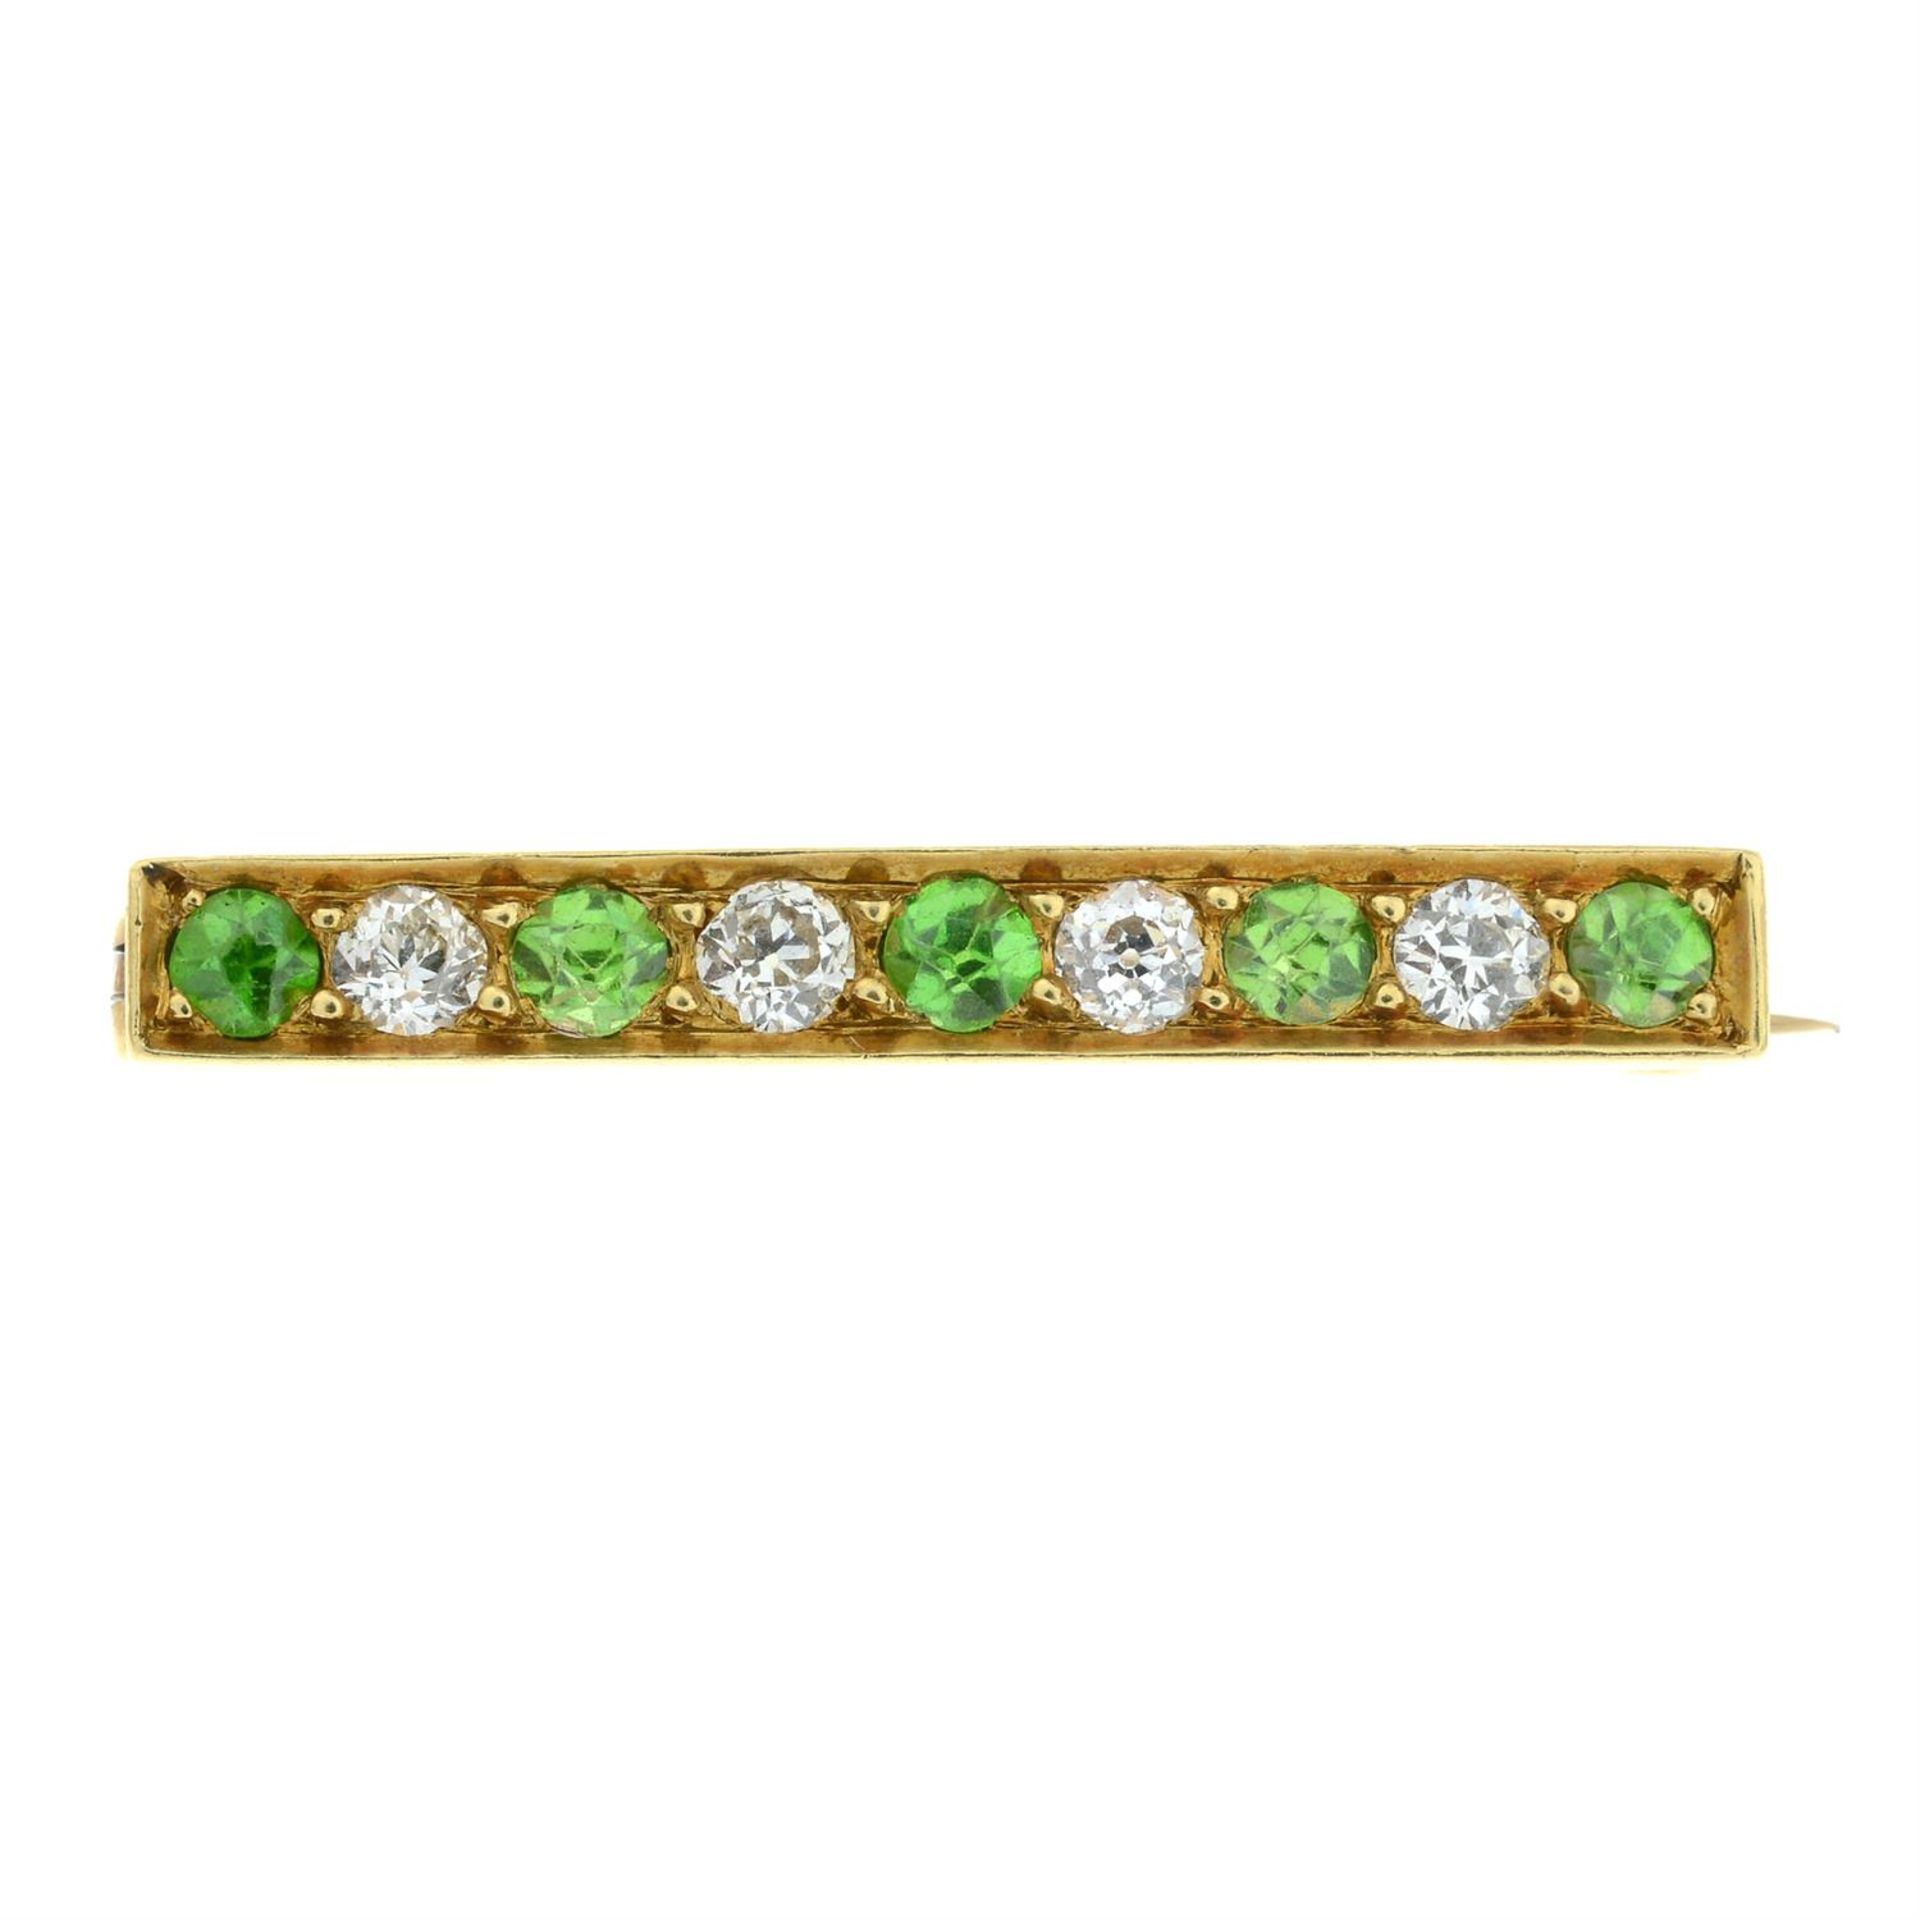 An early 20th century 18ct gold demantoid garnet and old-cut diamond bar brooch or lace pin.